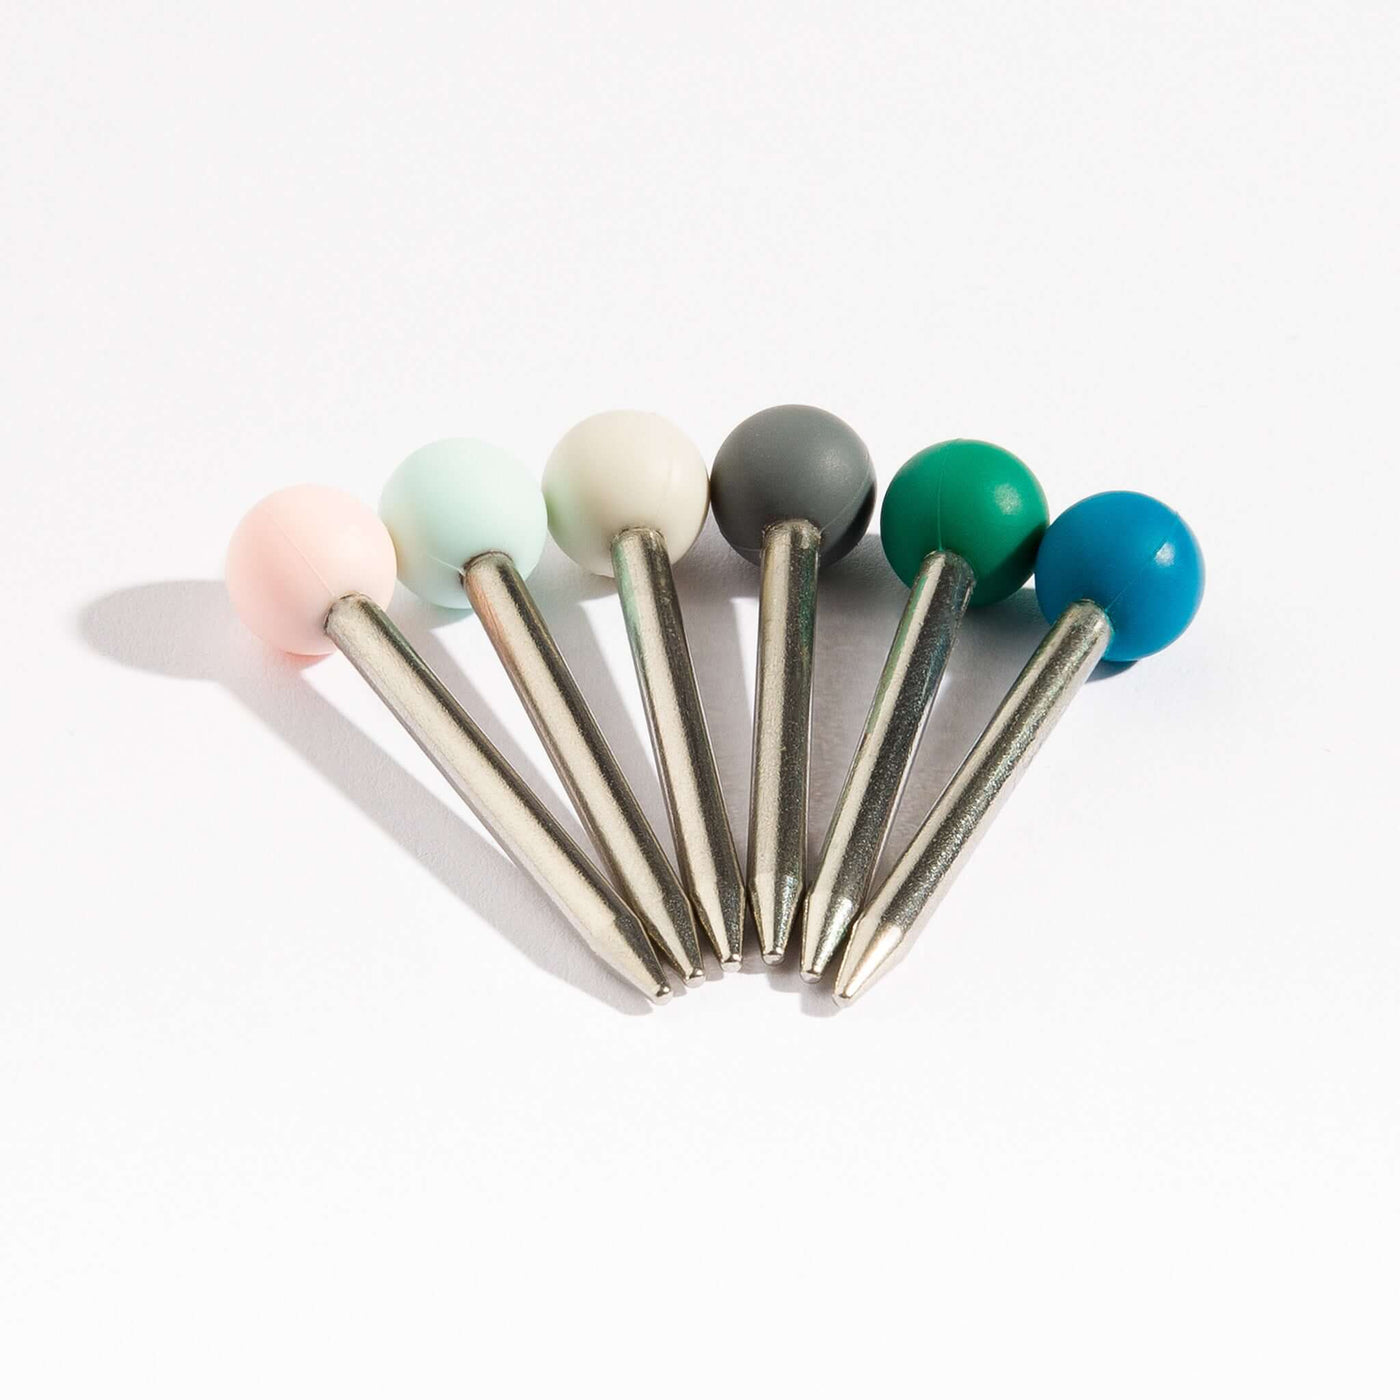 Set of 6 pokers with silicone heads in colorful colors and stainless steel ends on white background.